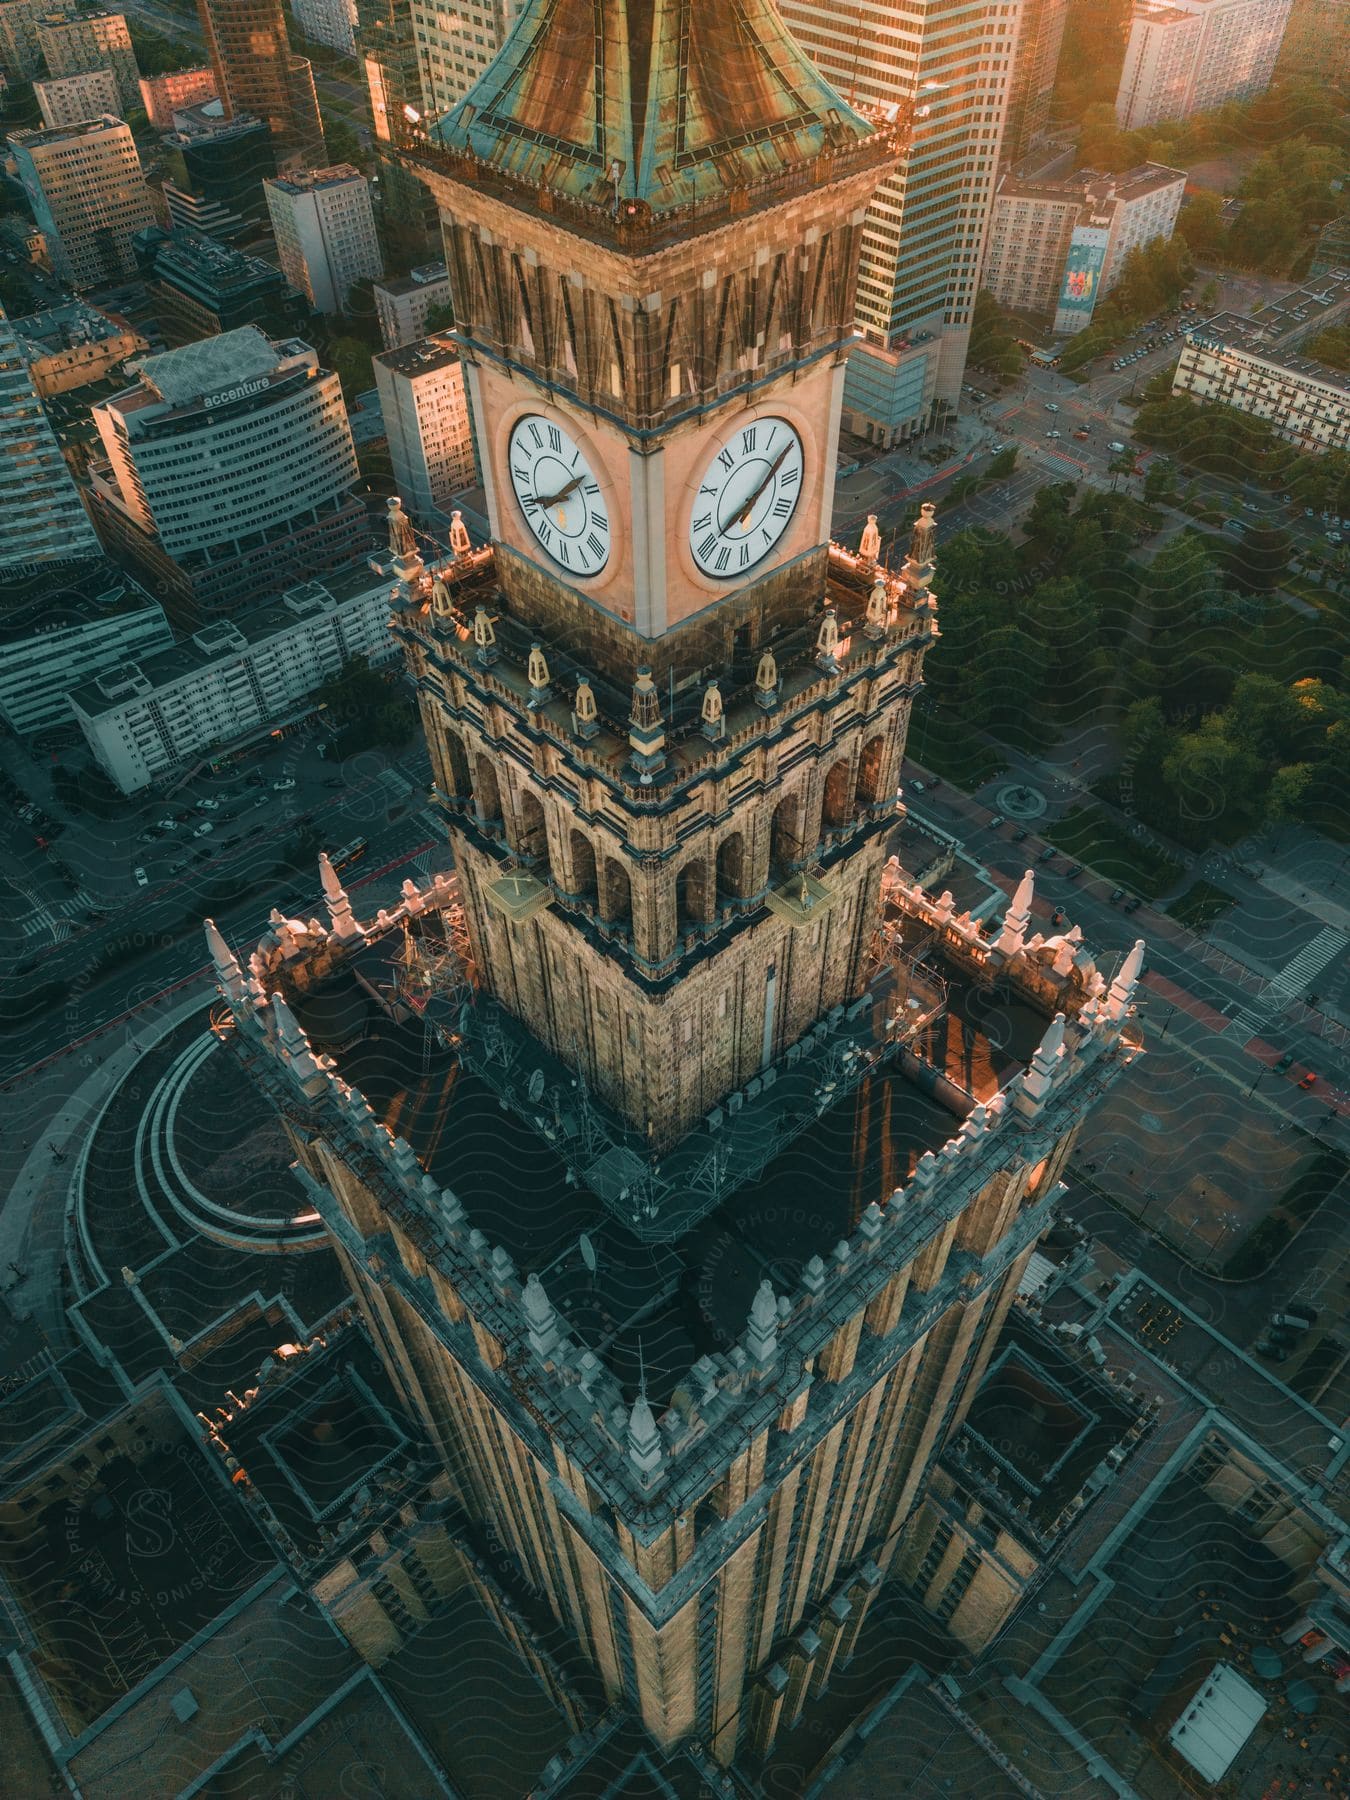 A view of a large clock tower in the middle of an urban area.